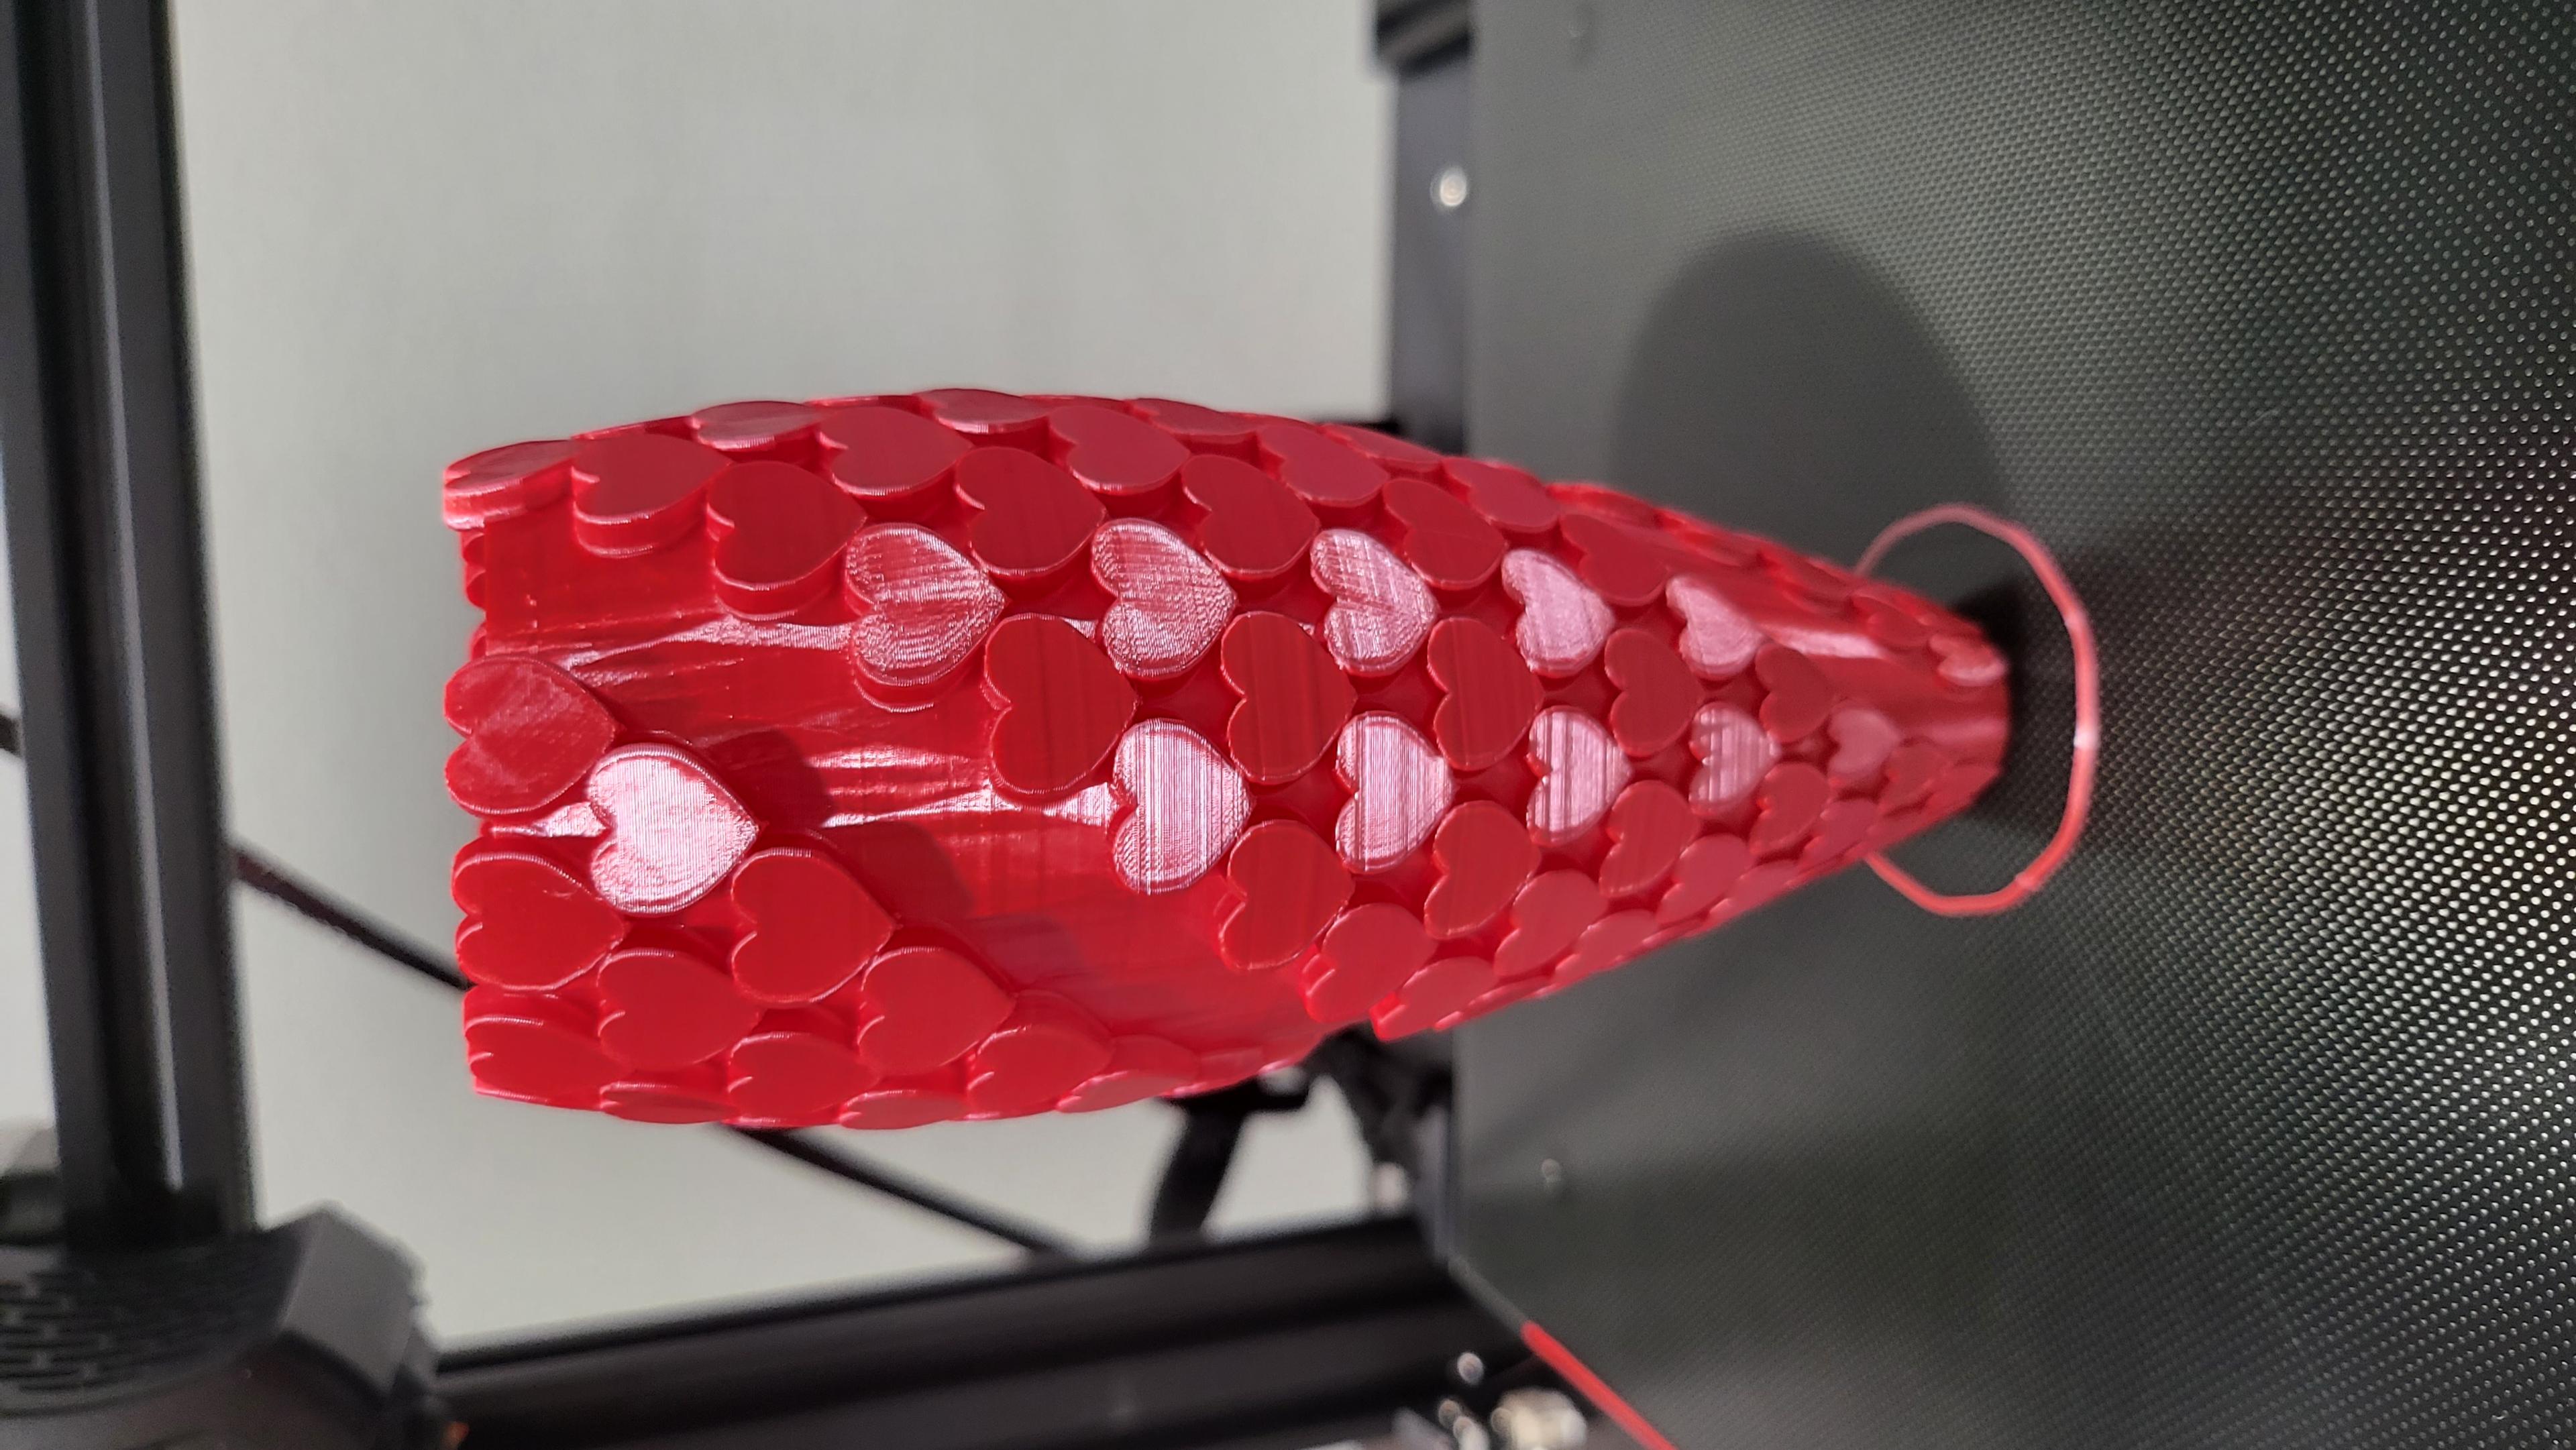 Hearts Vase - Overture silk red pla. Nice easy print. Wish the base was a little bit bigger for added stability but it's not bad. Thanks for sharing the stl. - 3d model